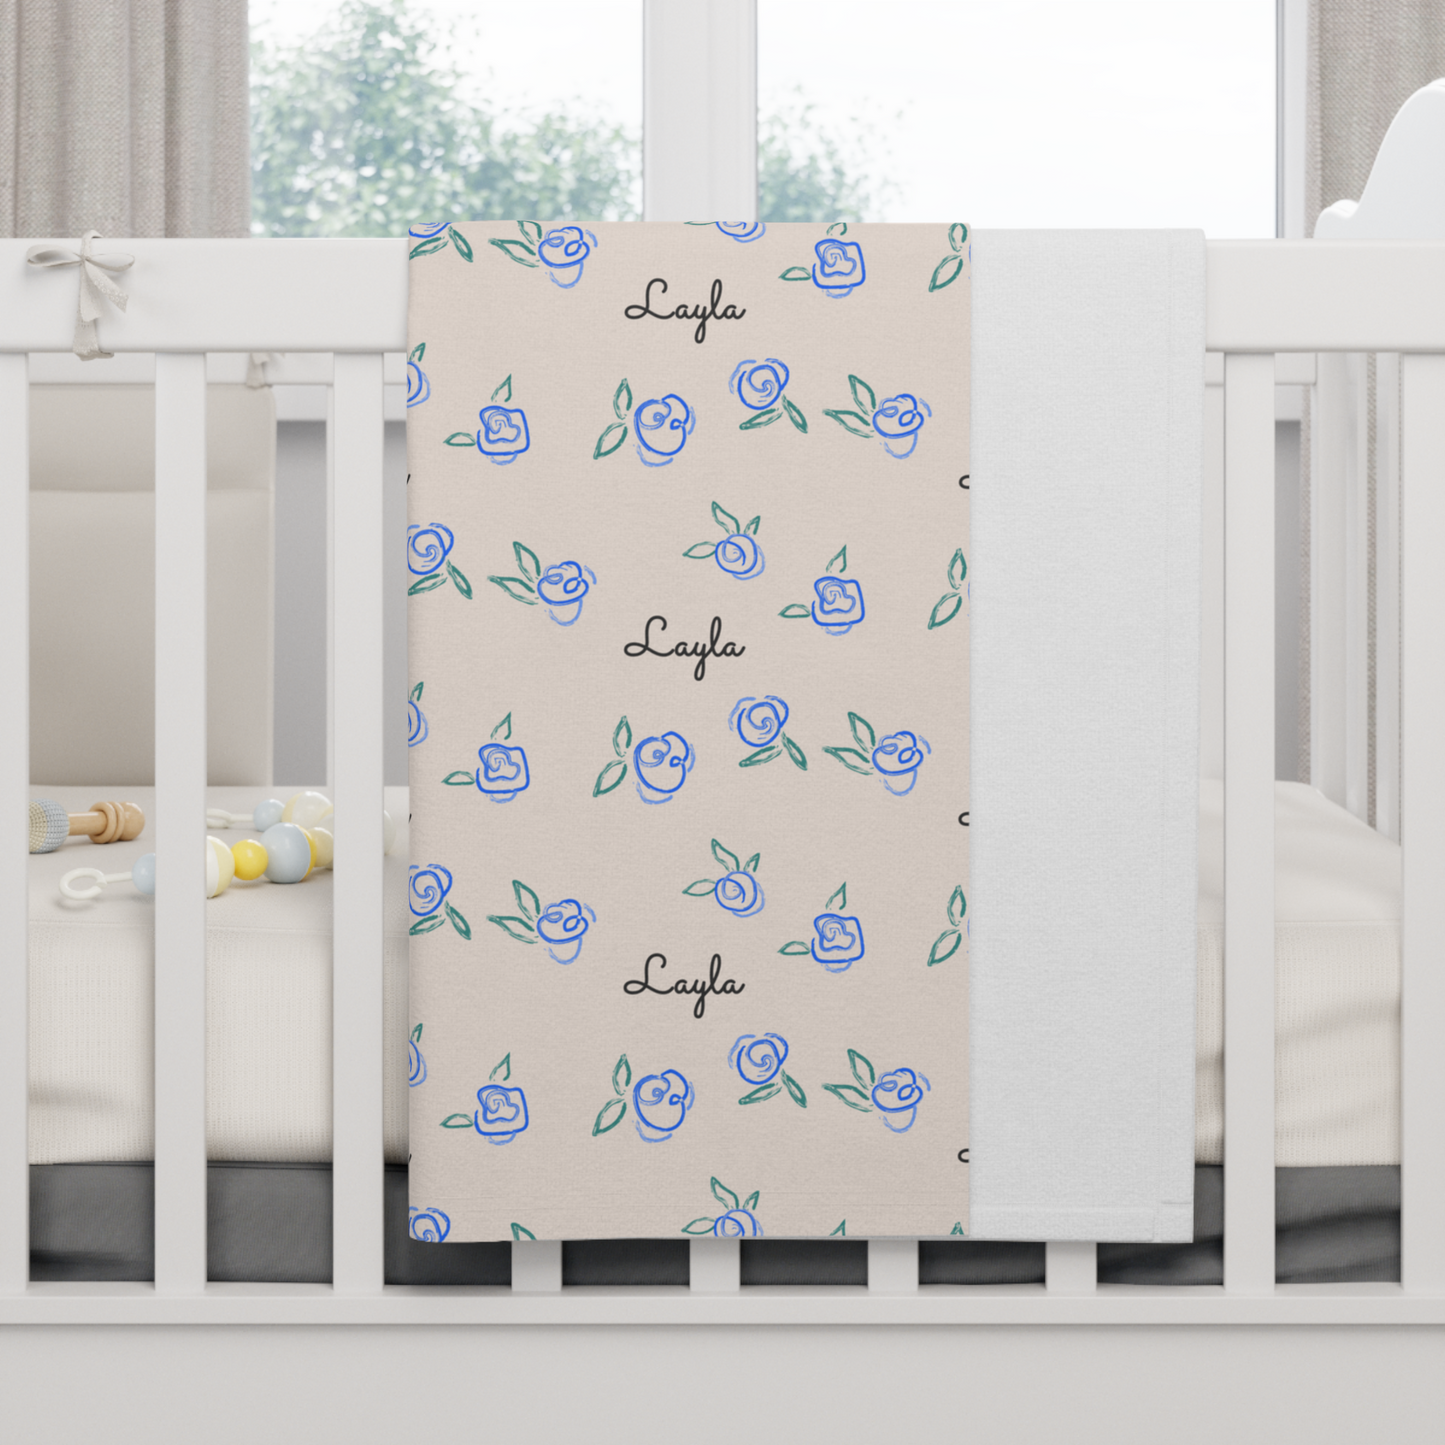 Fleece personalized baby blanket in blue rose pattern hung over side of white crib with window in the background